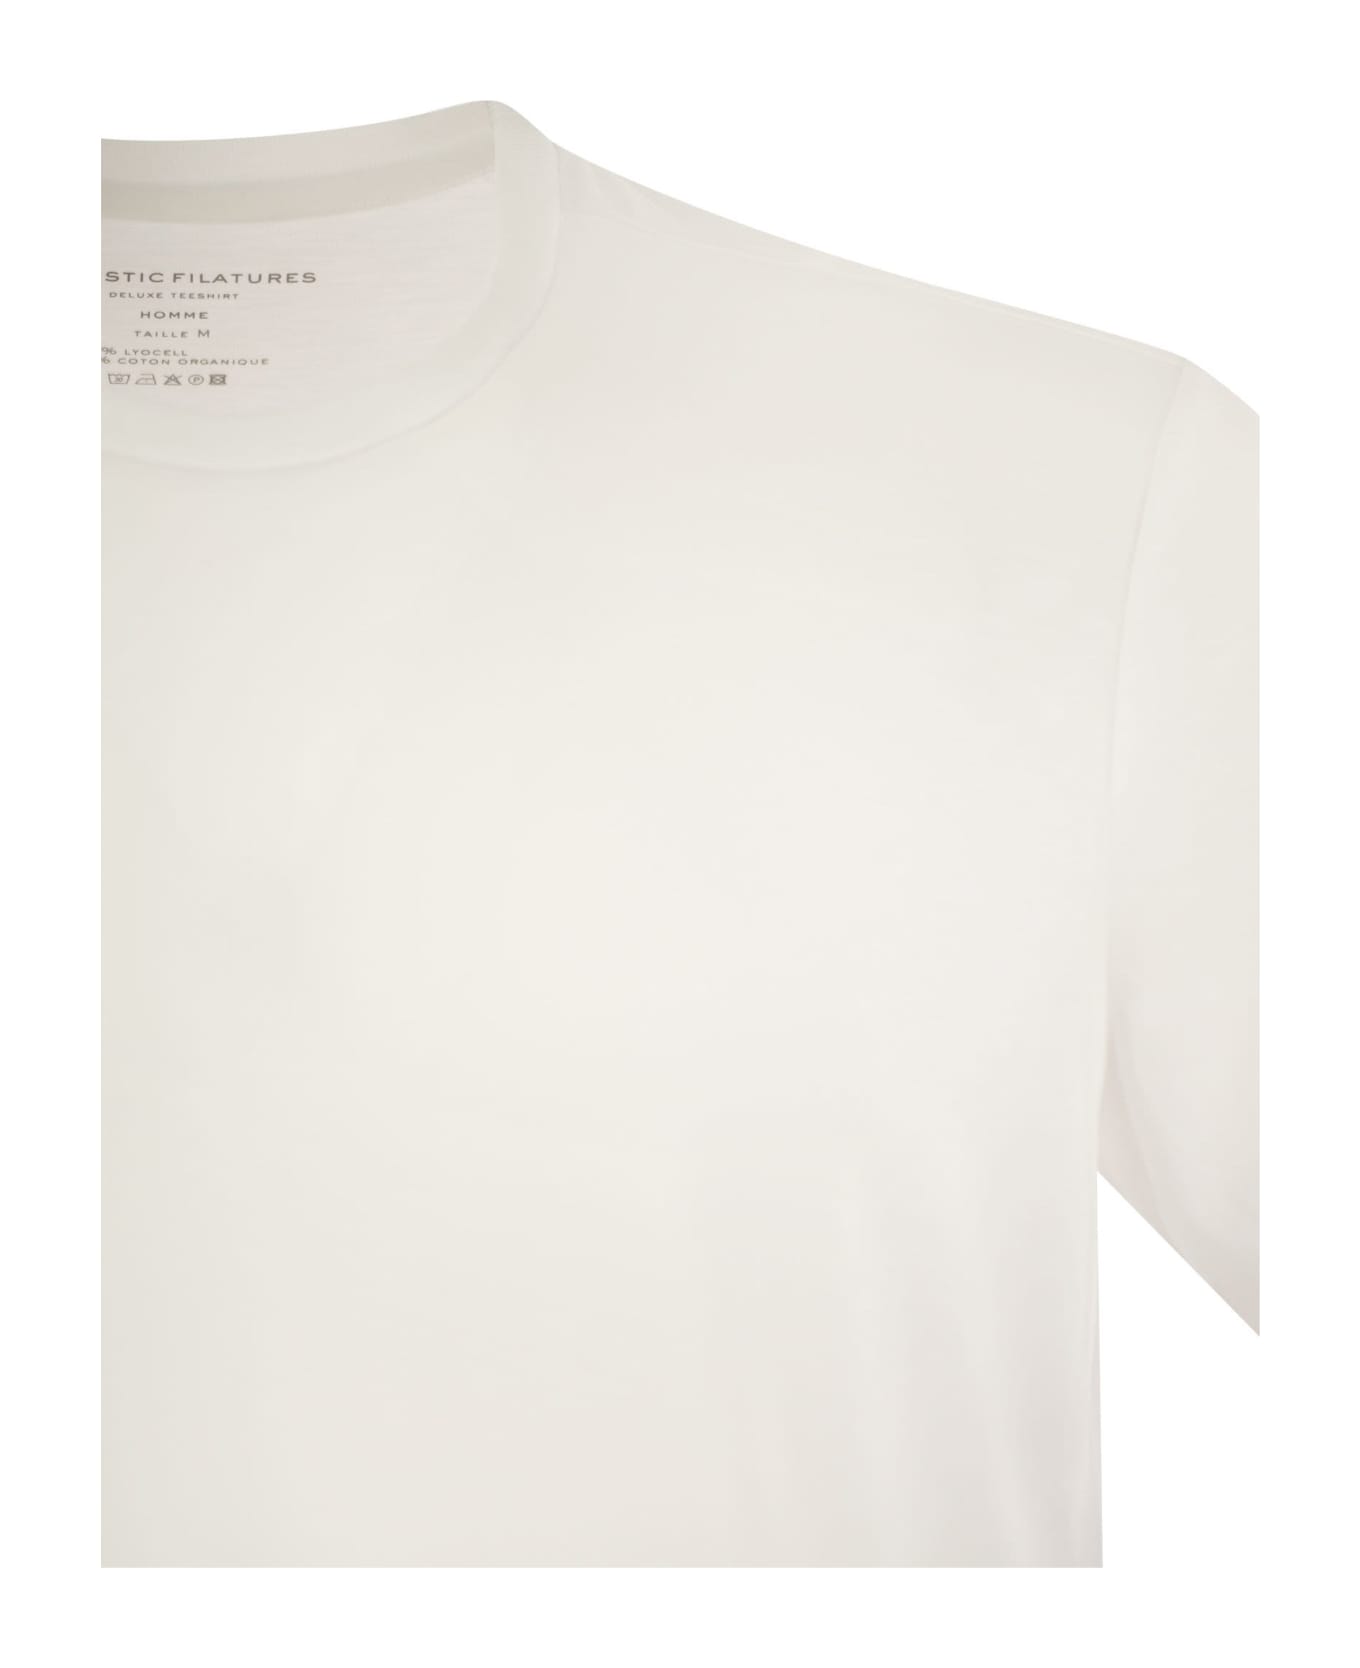 Majestic Filatures Short-sleeved T-shirt In Lyocell And Cotton - Bianco